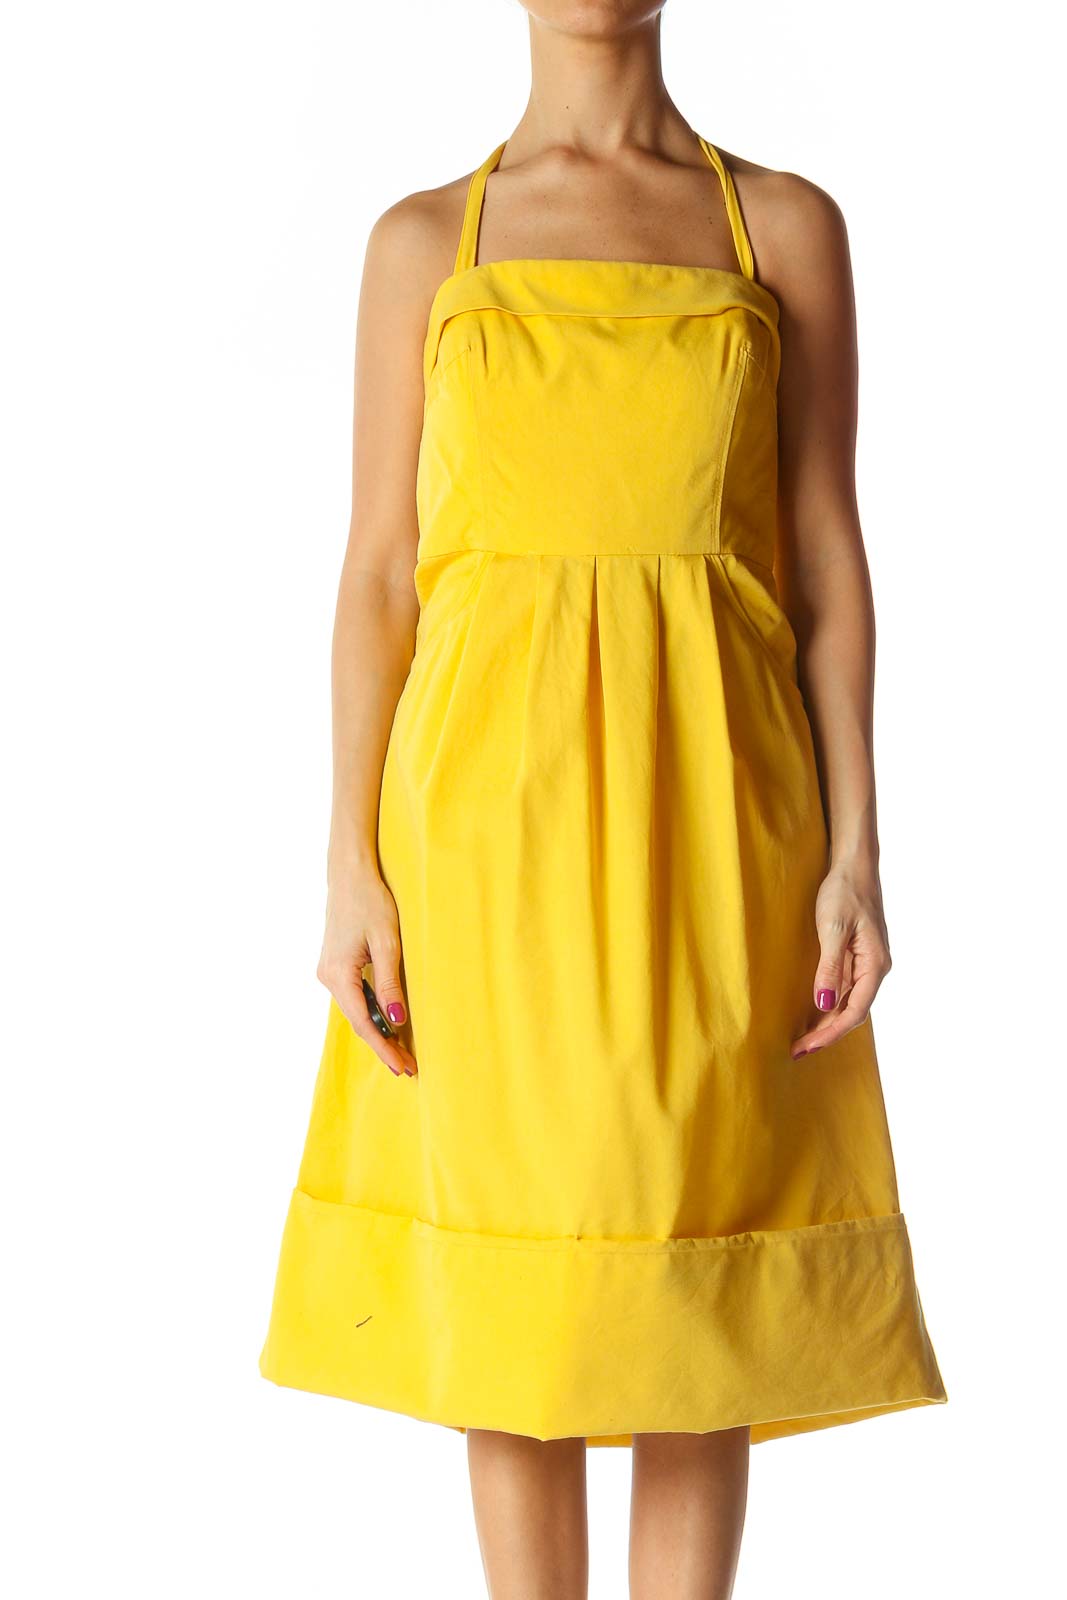 Yellow Solid Casual A-Line Dress Front